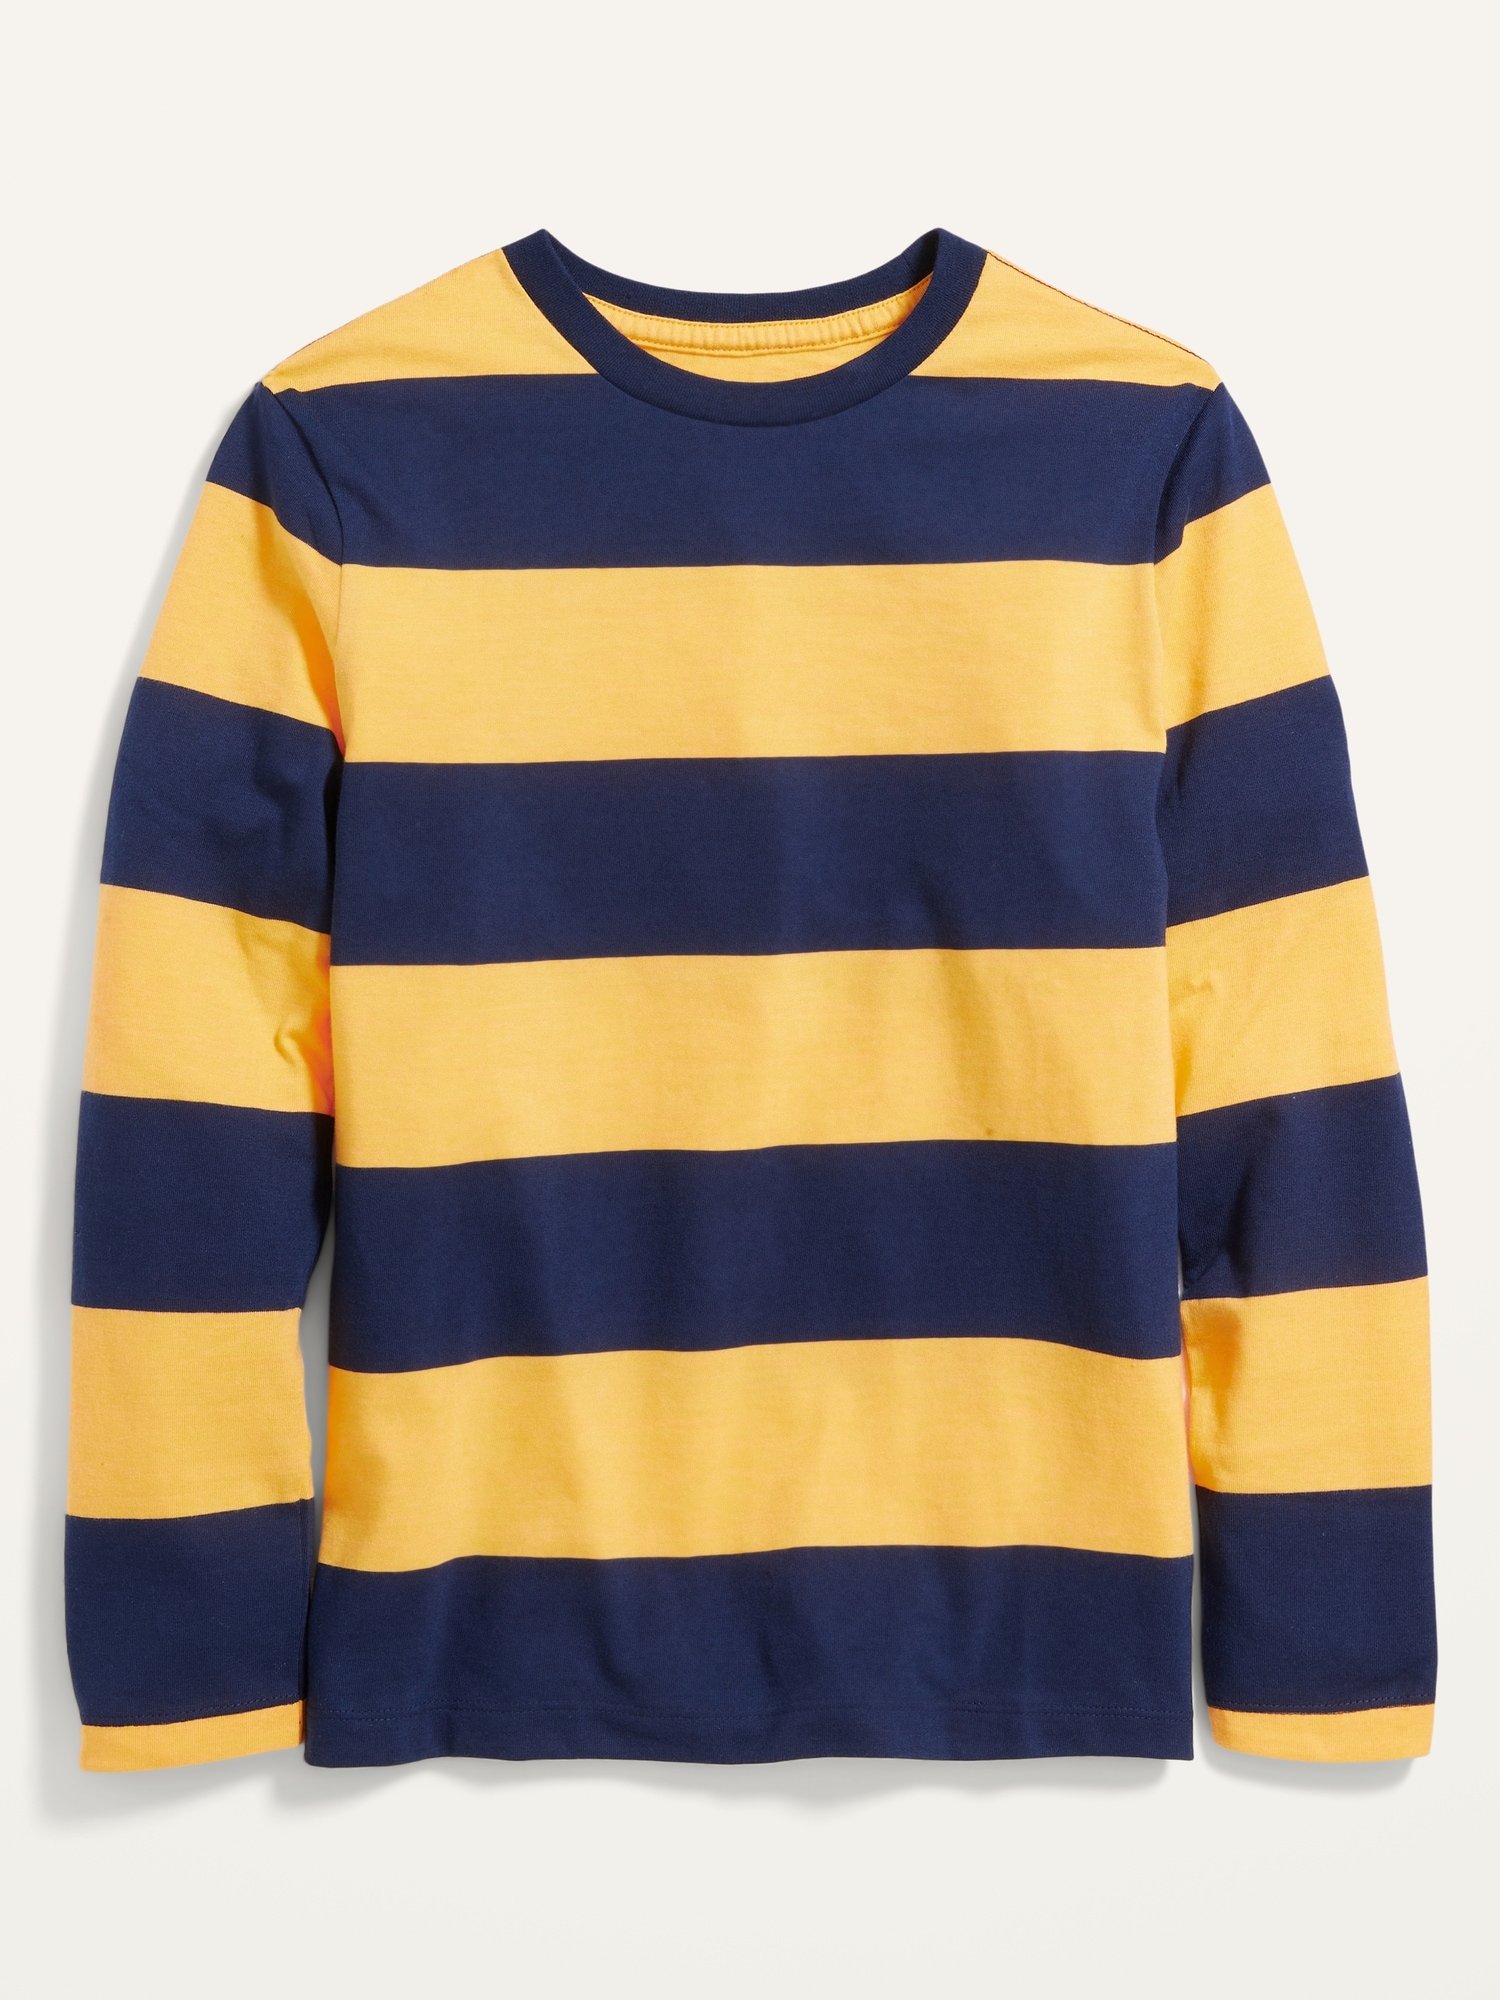 Softest Striped Long-Sleeve T-Shirt For Boys | Old Navy